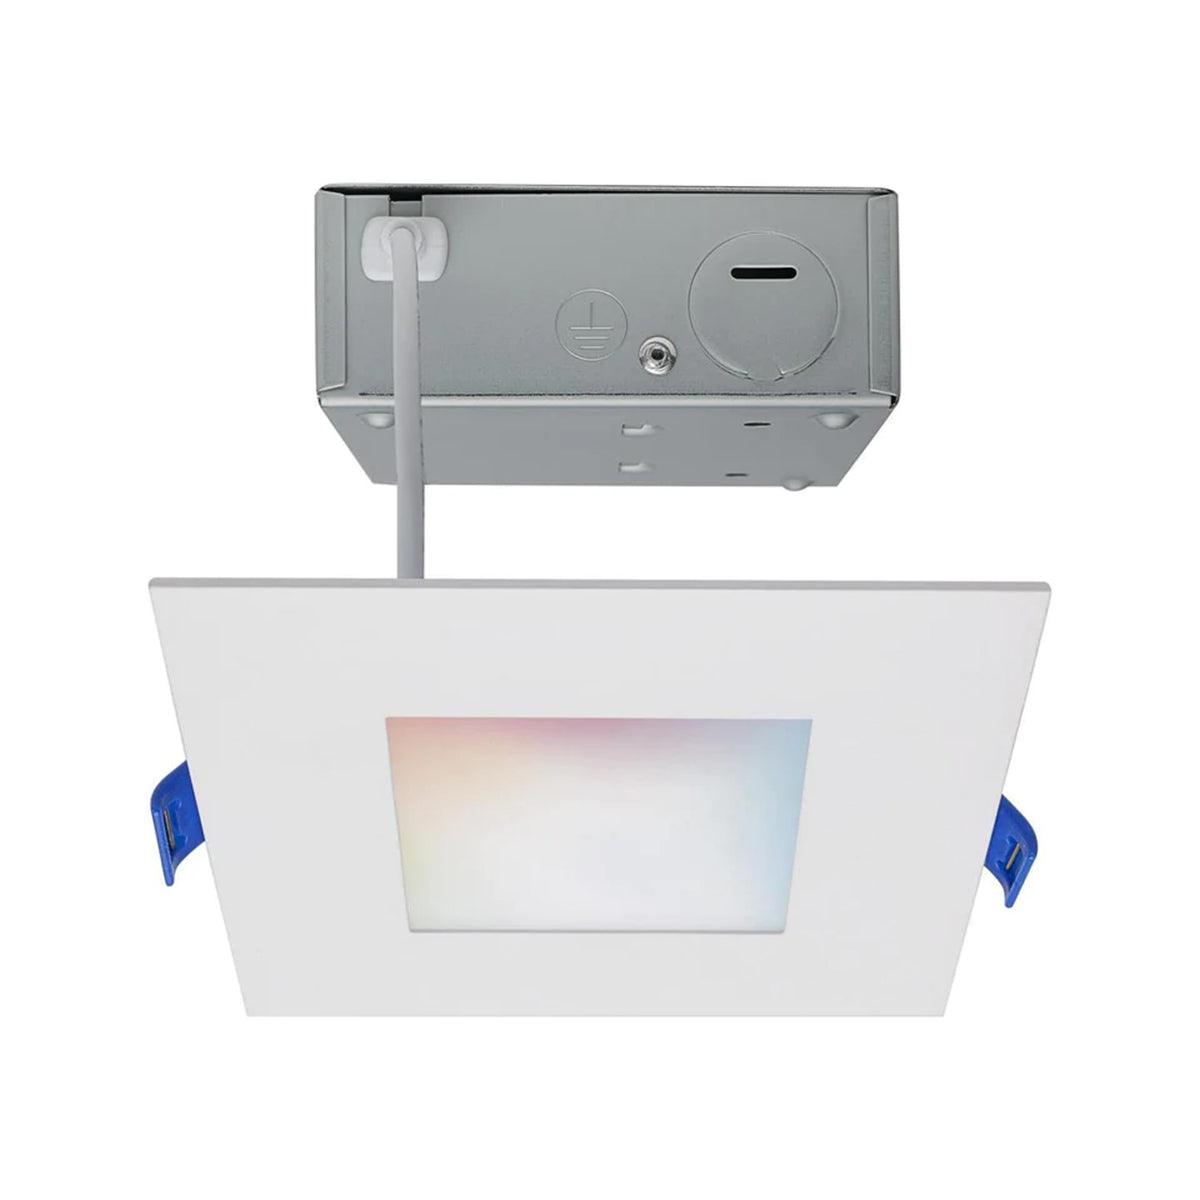 Satco Starfish, Flat Lens, 4 inch, Square Smart Canless LED Recessed Light, 9 Watt, 540 Lumens, Selectable CCT 2000K to 5000K RGB/Tunable White - Bees Lighting